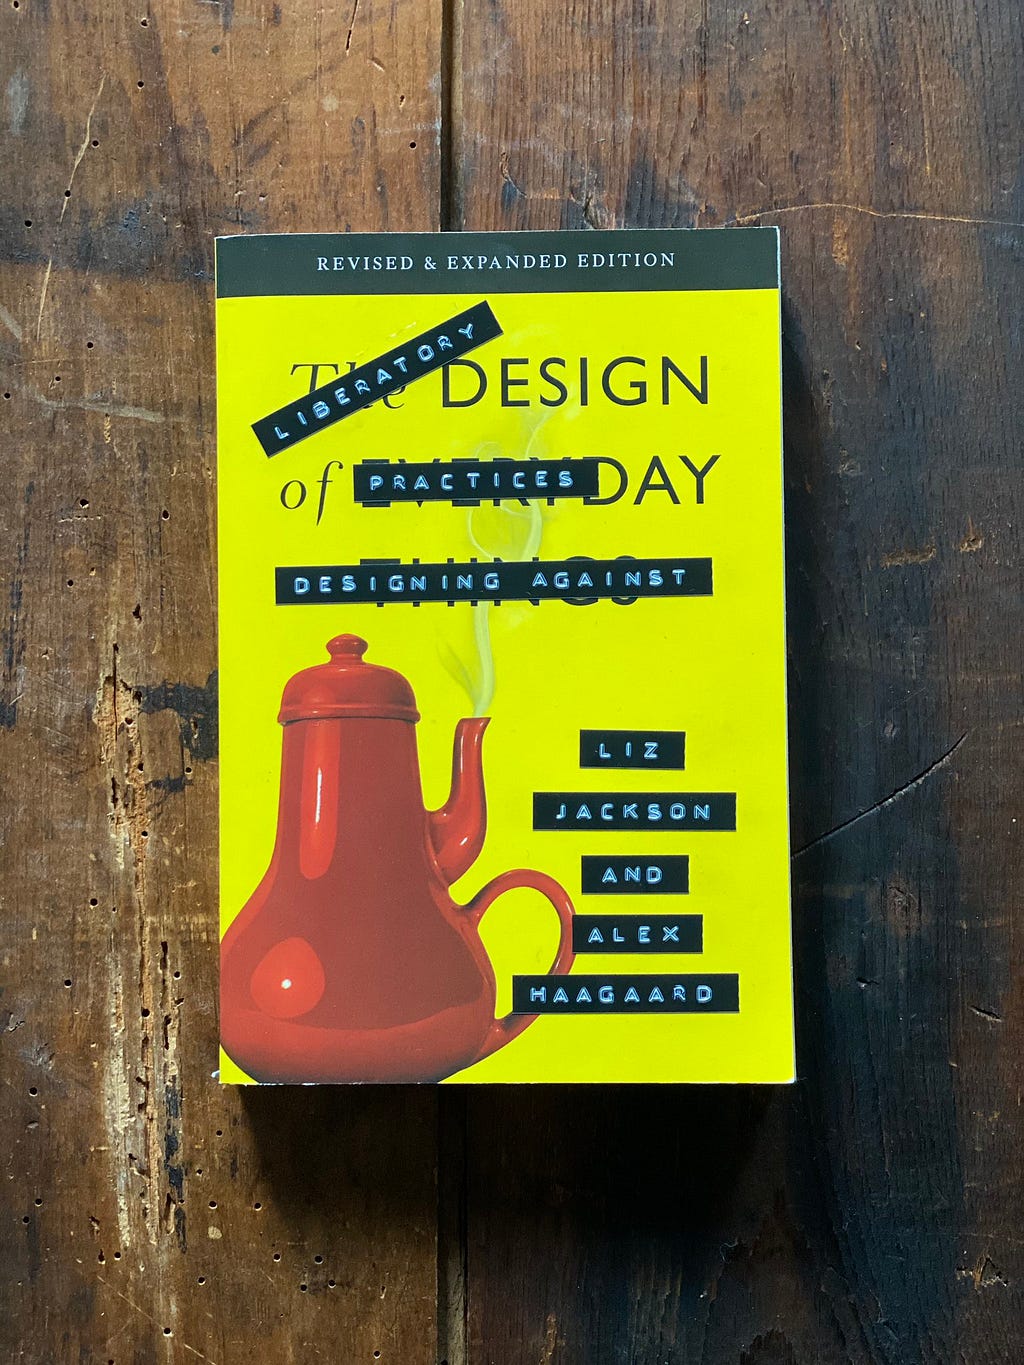 A softcover copy of the book The Design of Everyday Things, which has been altered with retro stick-on embossed letter strips, so the title now says, “Literatory Design Practices: Designing Against” and the authors now appear to be “Liz Jackson and Alex Haagaard”